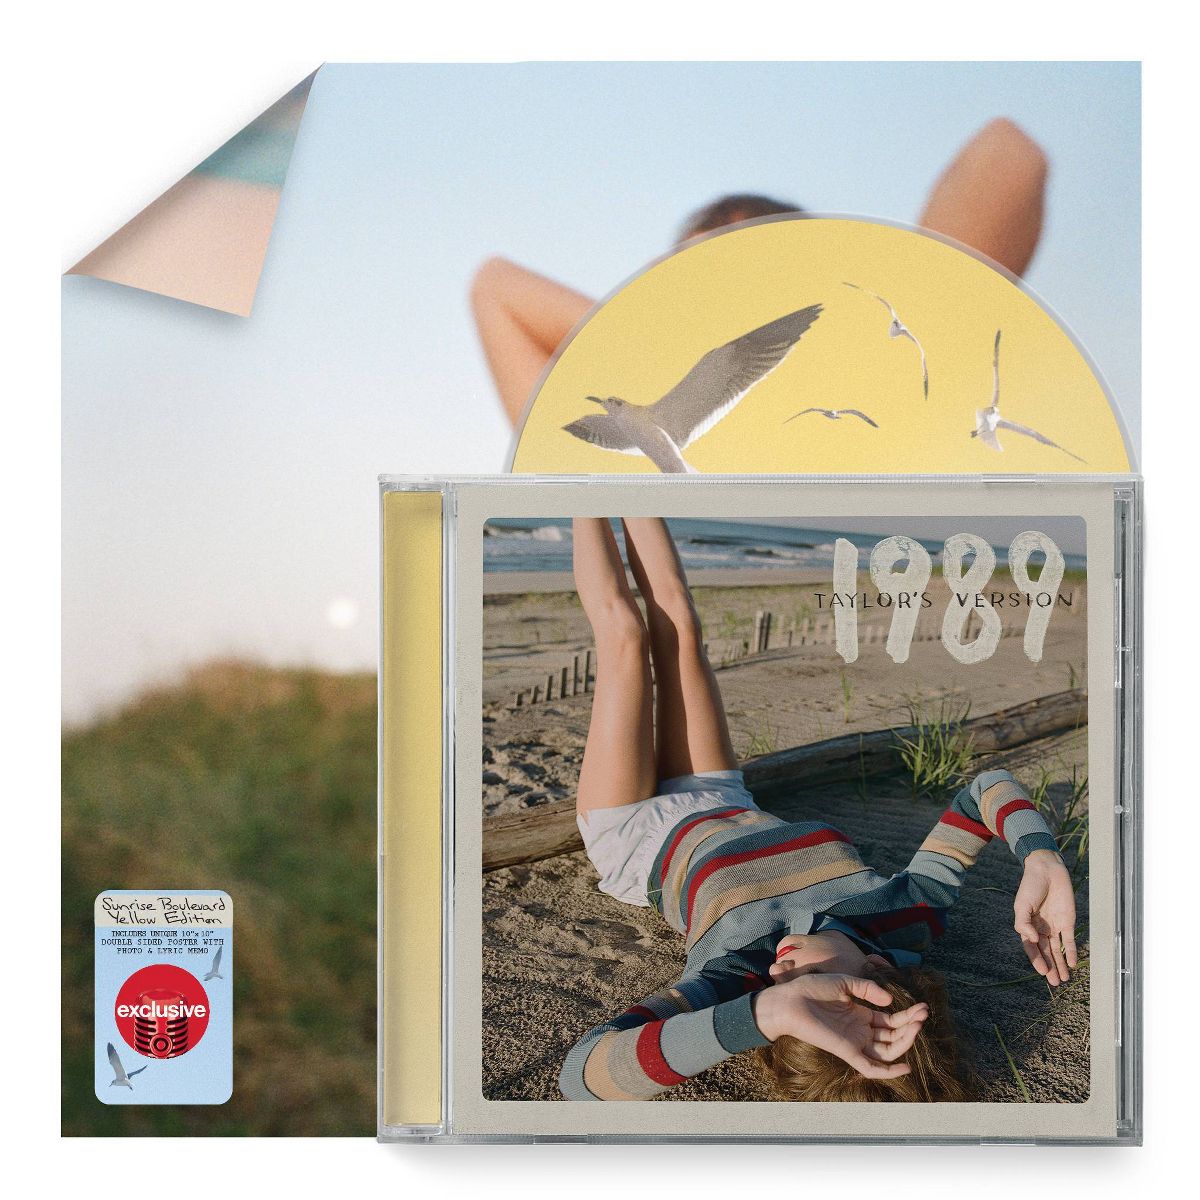 Taylor Swift 1989 (Taylor's Version) Sunrise Boulevard Yellow Deluxe Poster Edition